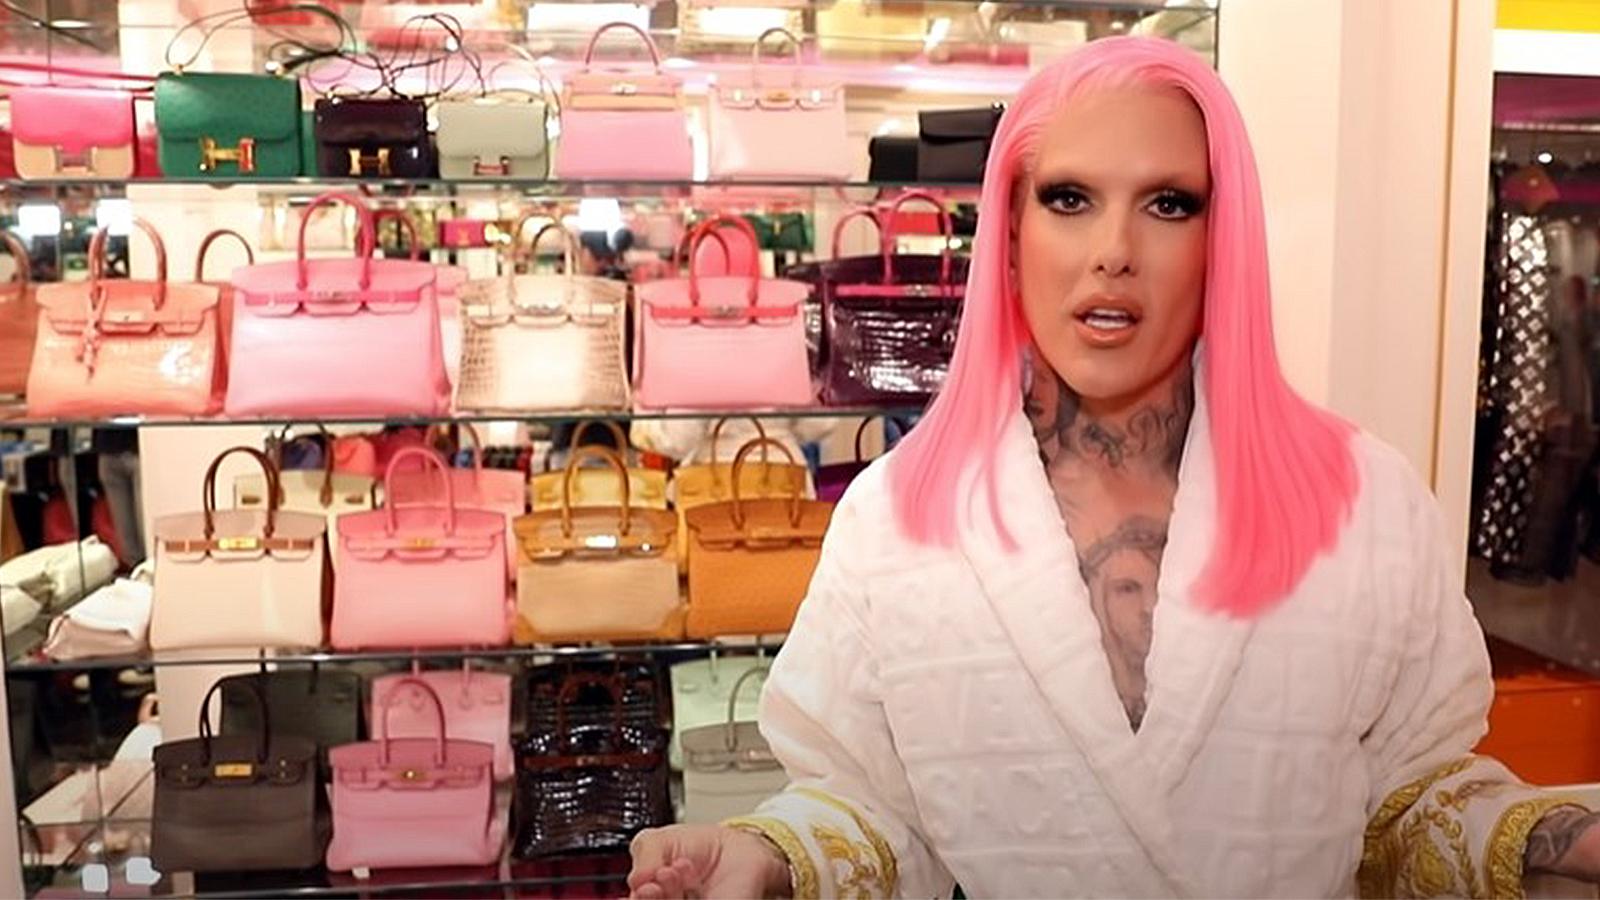 r Jeffree Star's Purse Collection Is Insane